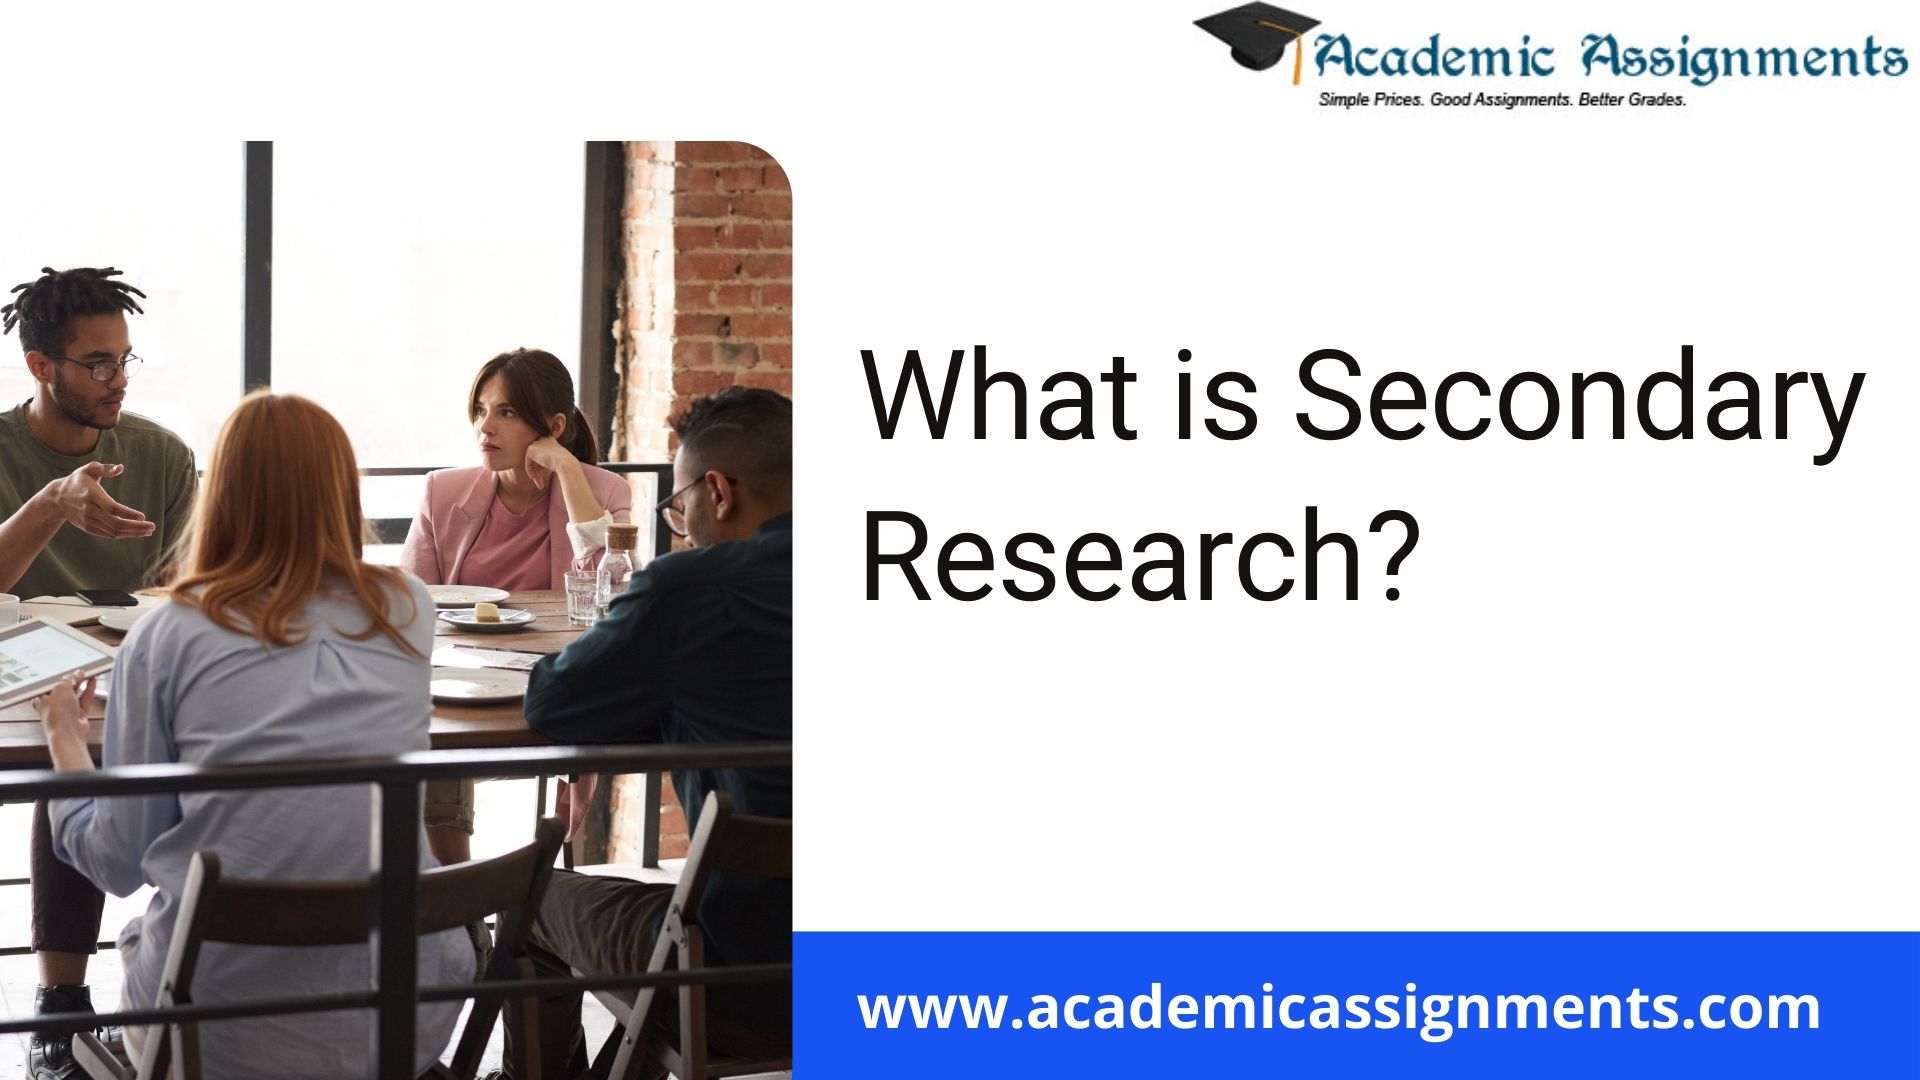 What is Secondary Research